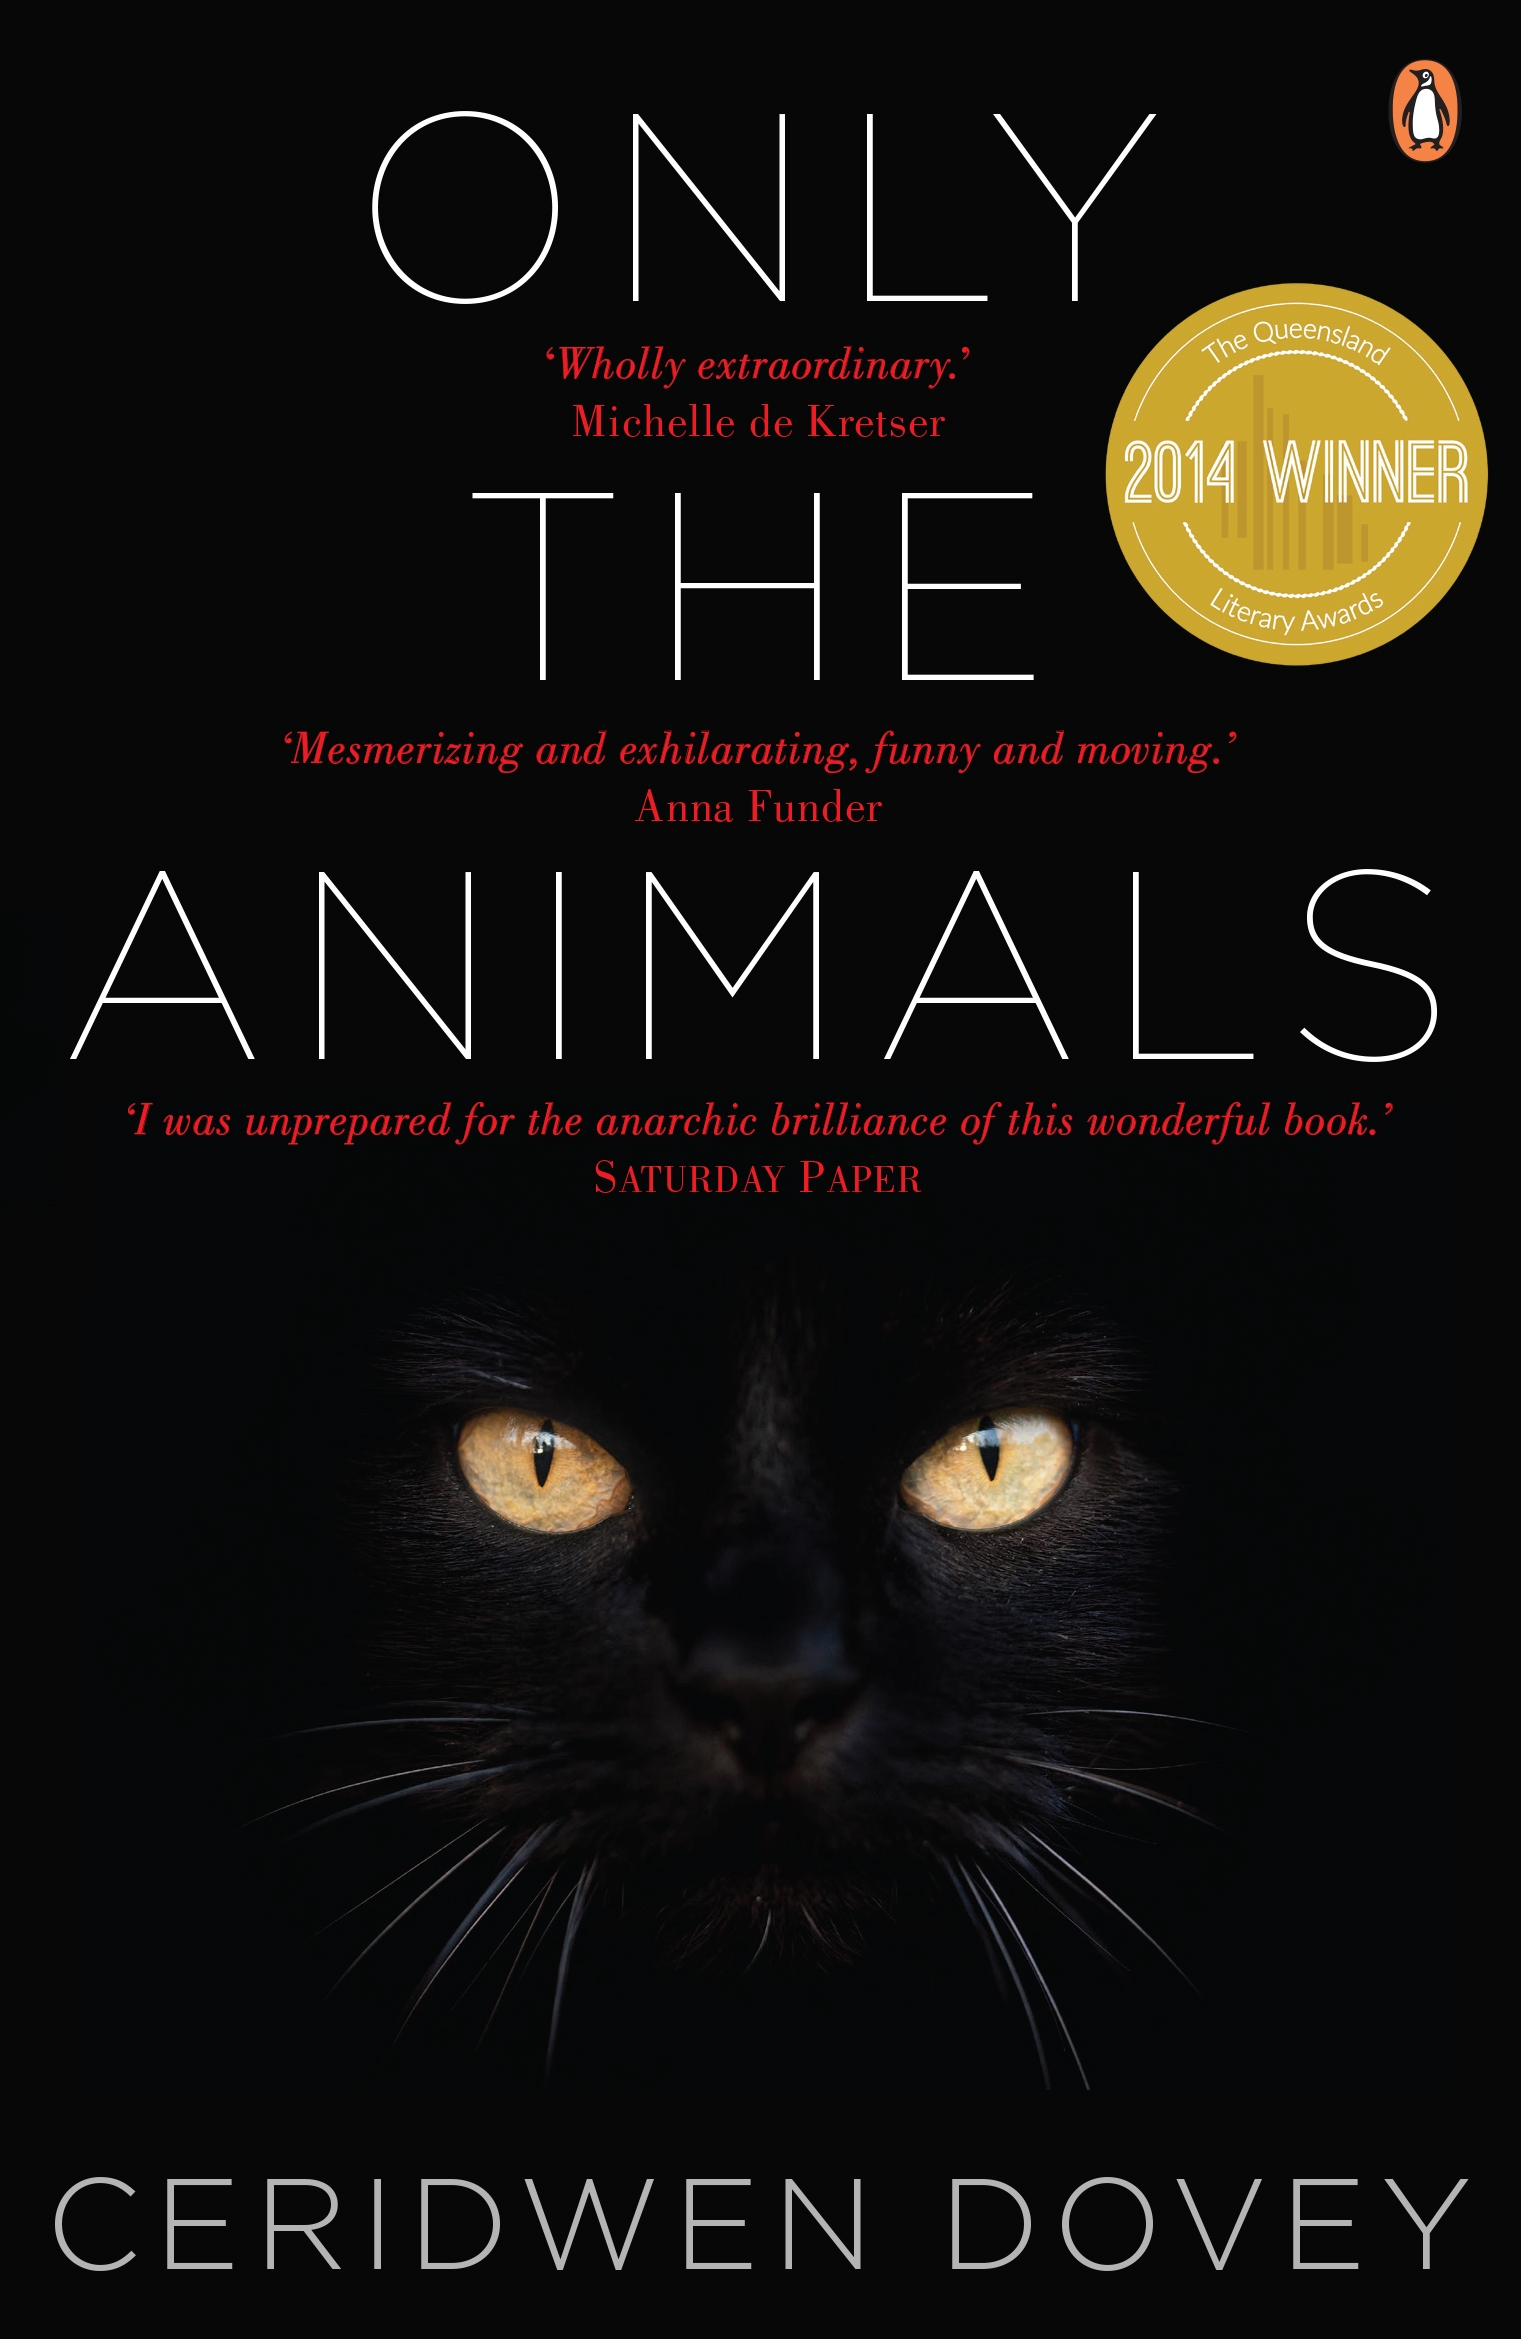 Only the Animals by Ceridwen Dovey - Penguin Books Australia